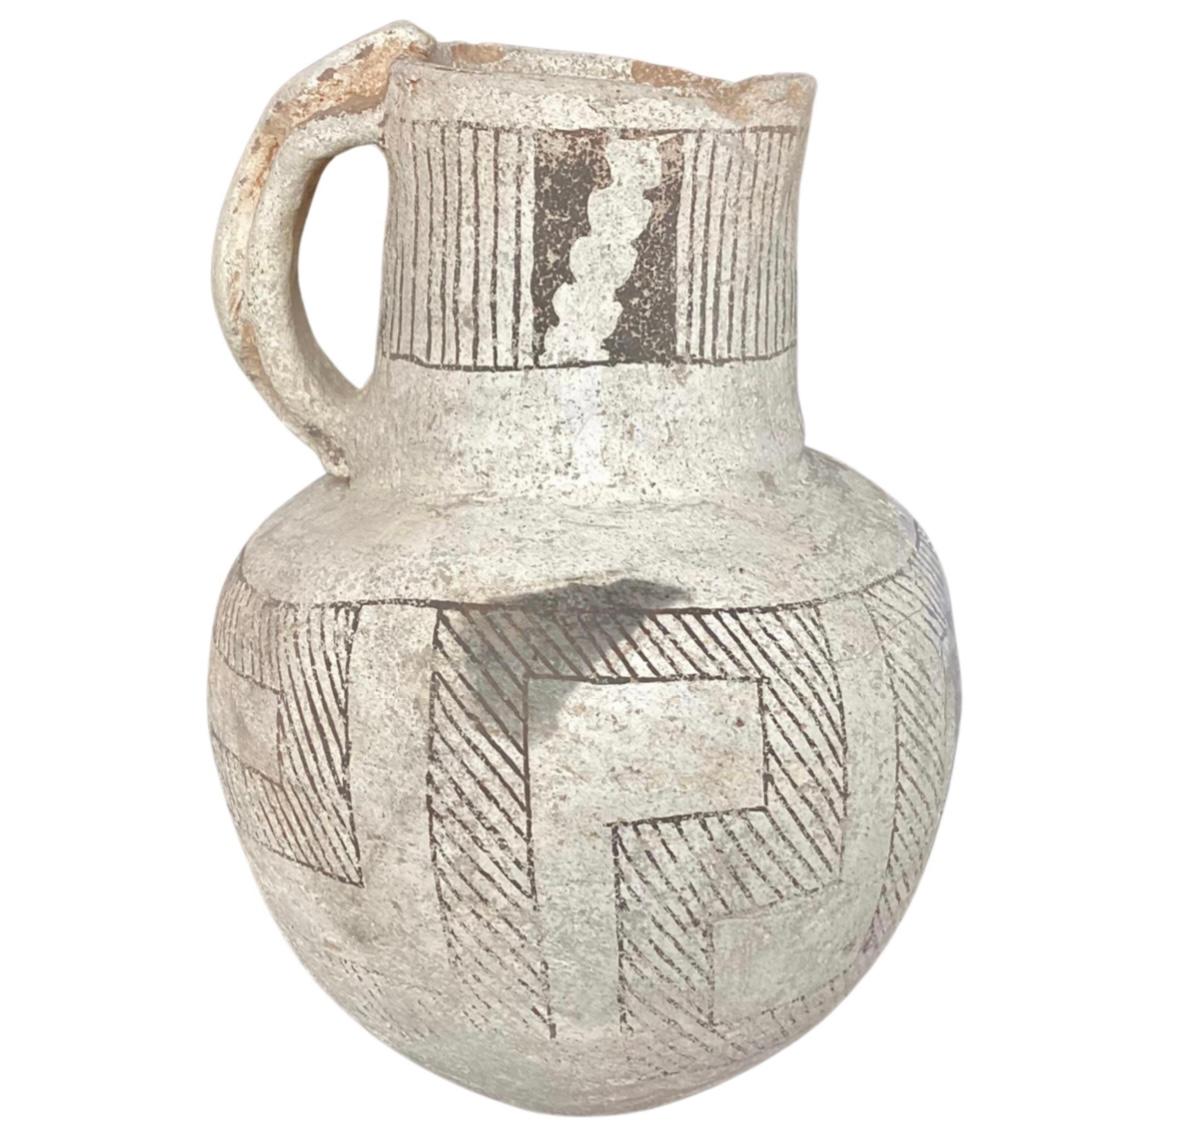 Stunning piece of Native American pottery. Pitcher has a round body and a thick handle that includes an applied snake. The white-ground exterior features a band of vertical lines and serrations presented in an applied black pigment. Believed to be